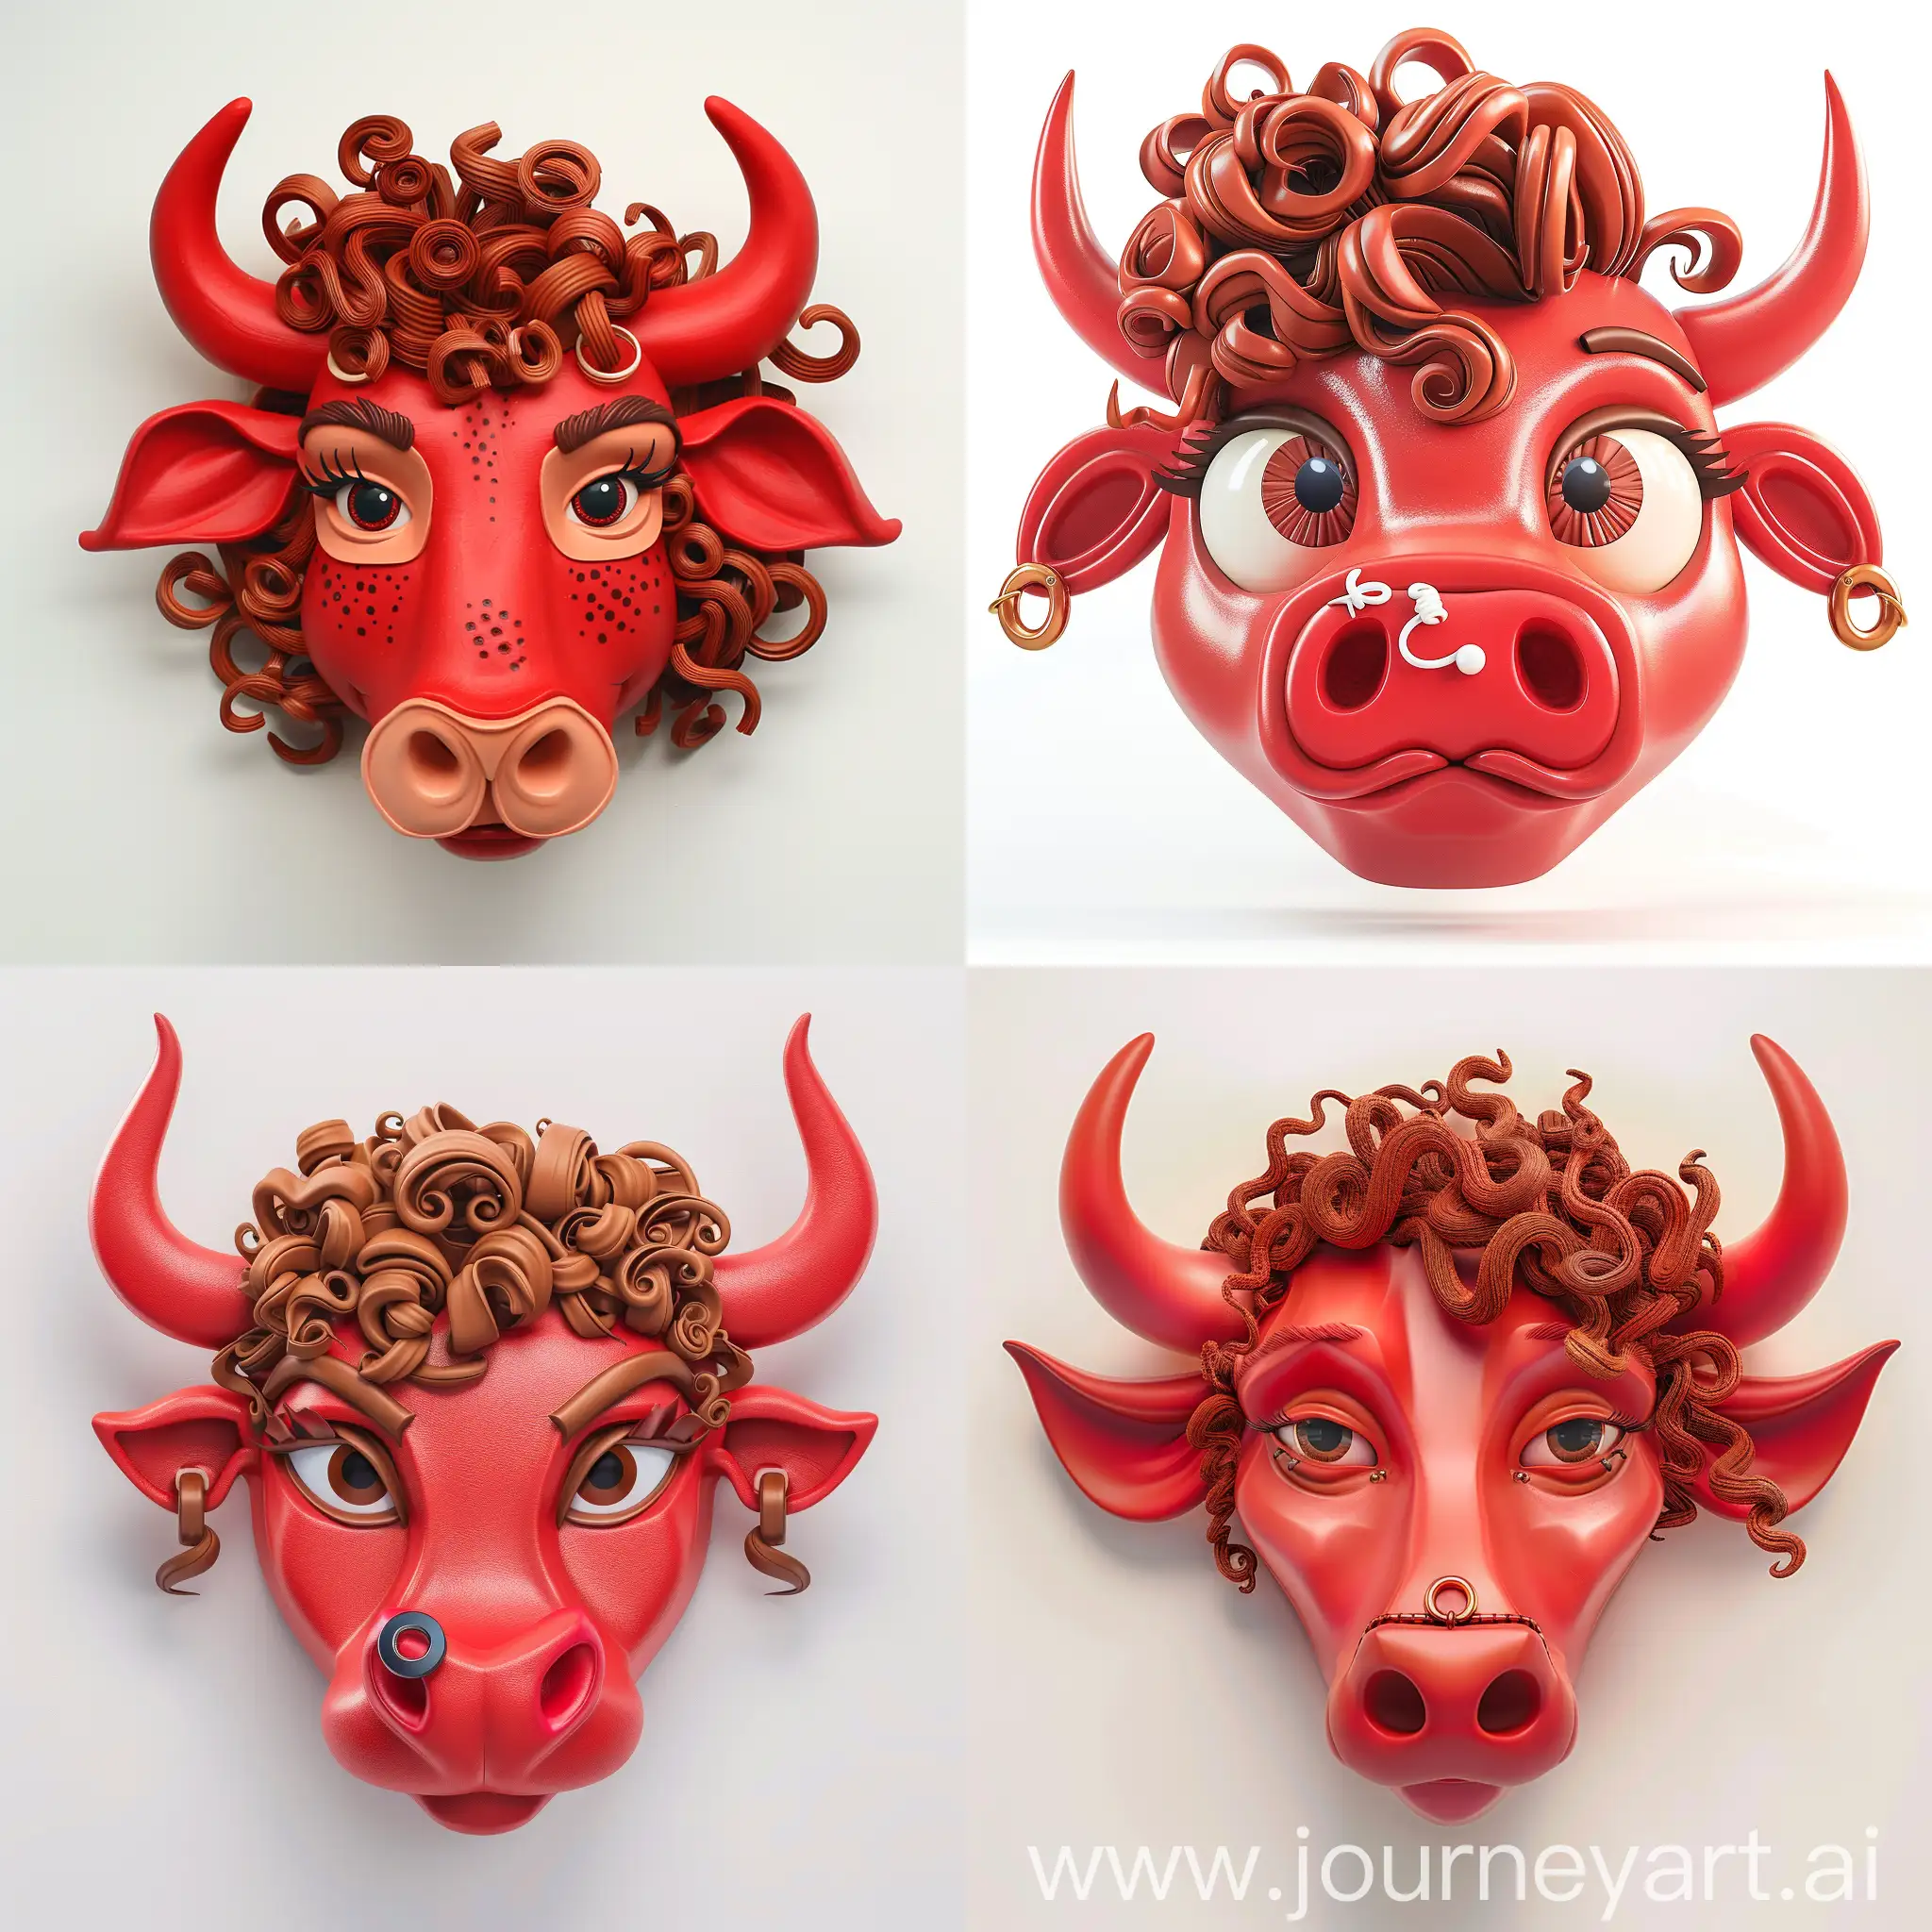 Adorable-Red-Bull-Head-with-Curly-Brown-Hair-and-Nose-Ring-in-Plasticine-Style-on-White-Background